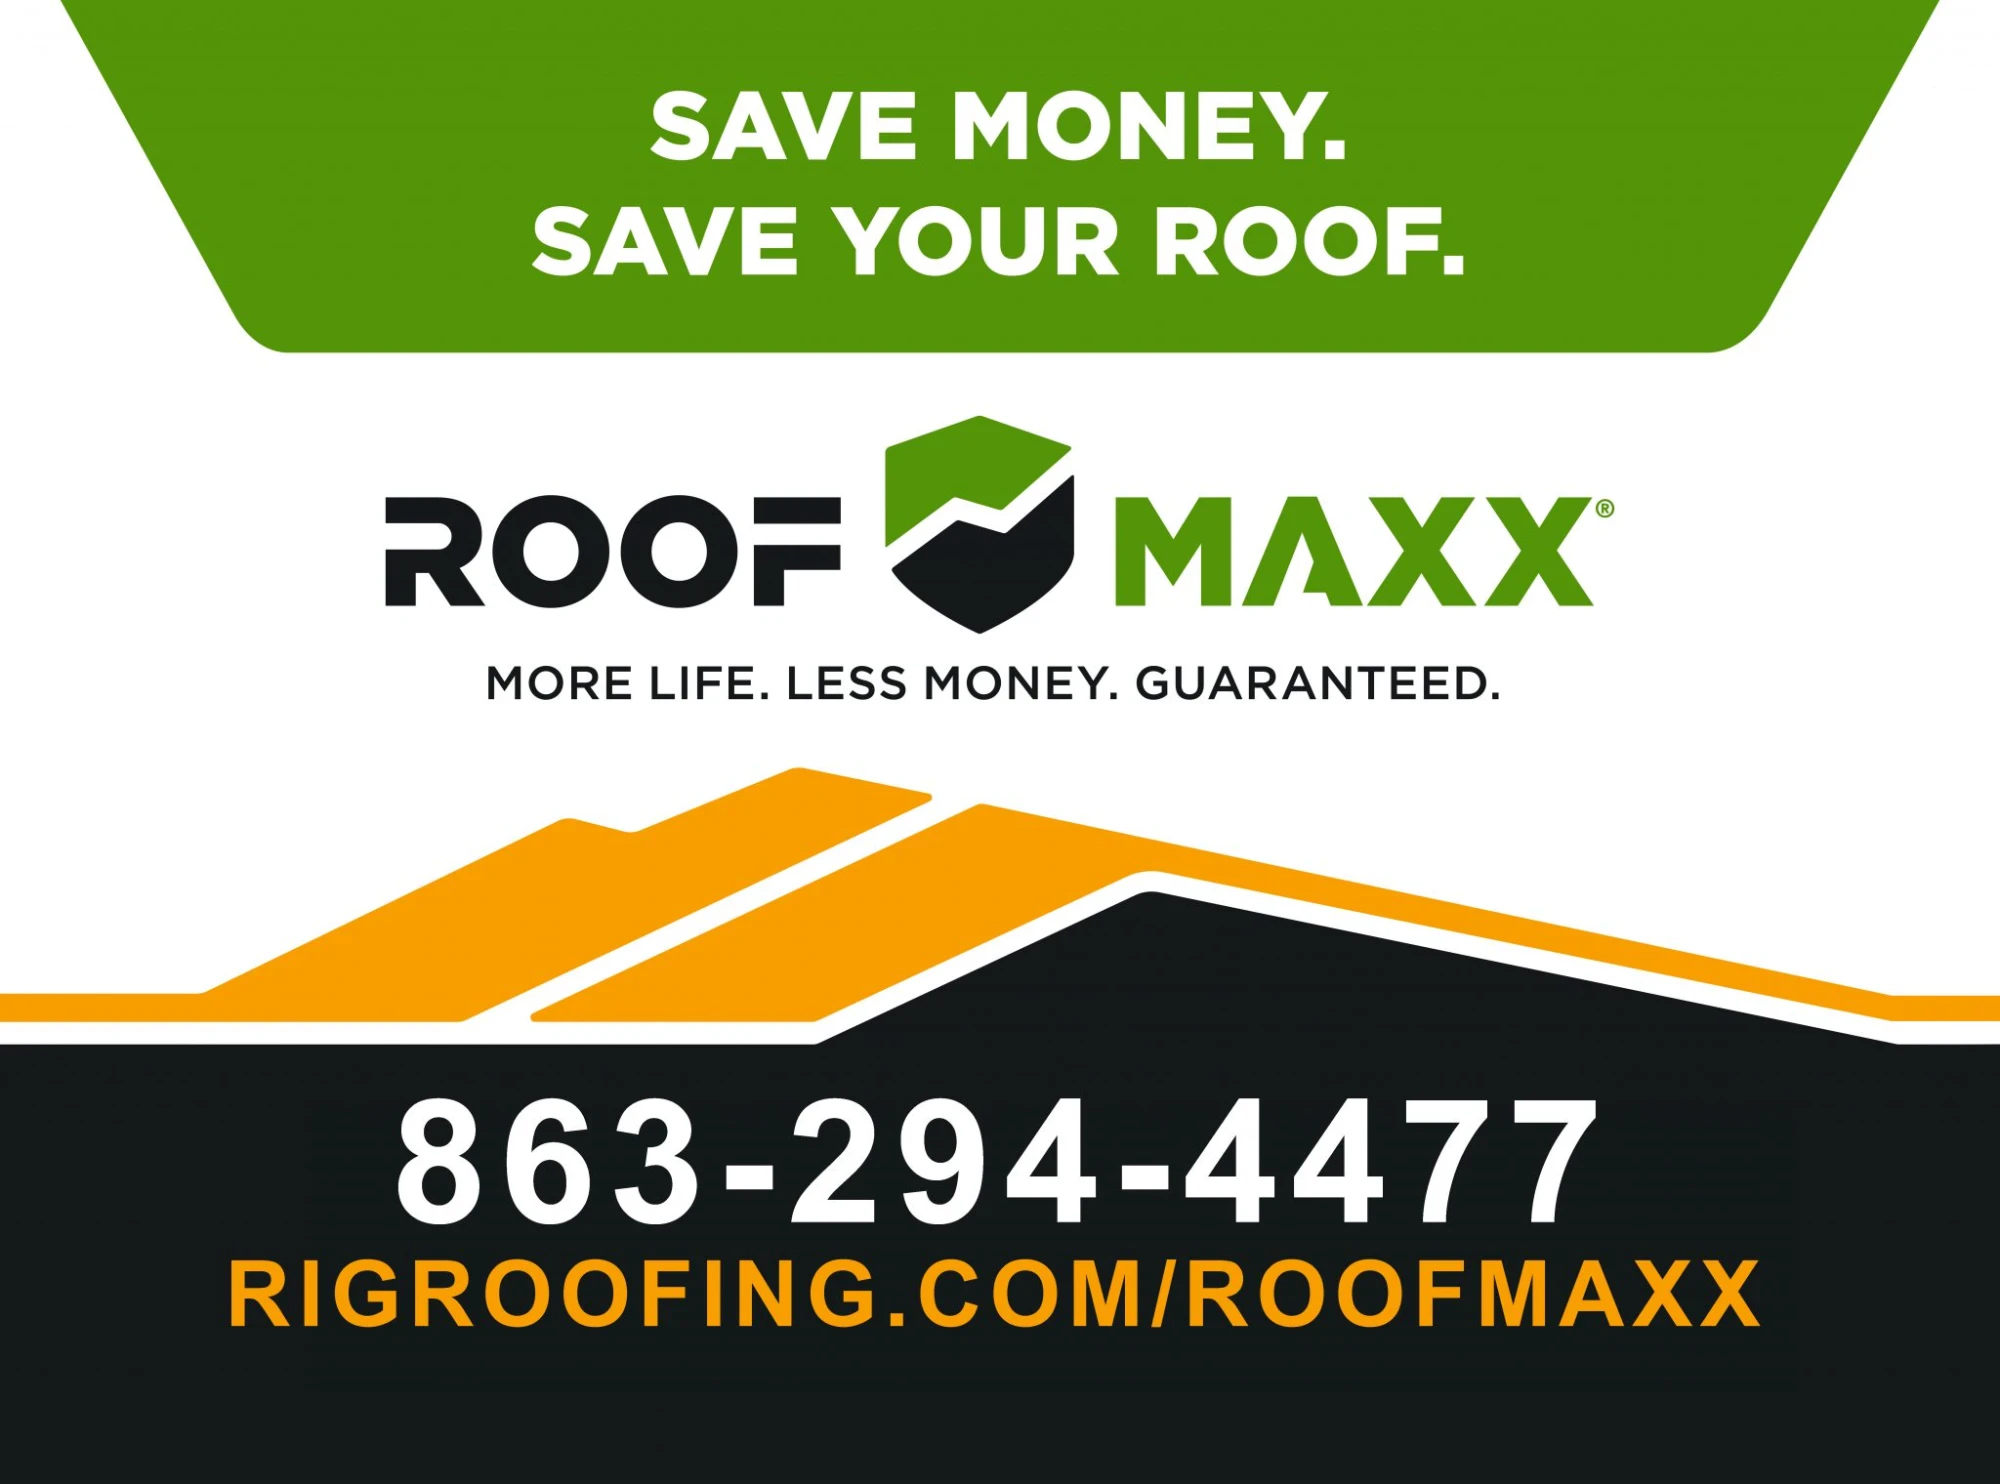 blog post What Is So Great About Roof Maxx?